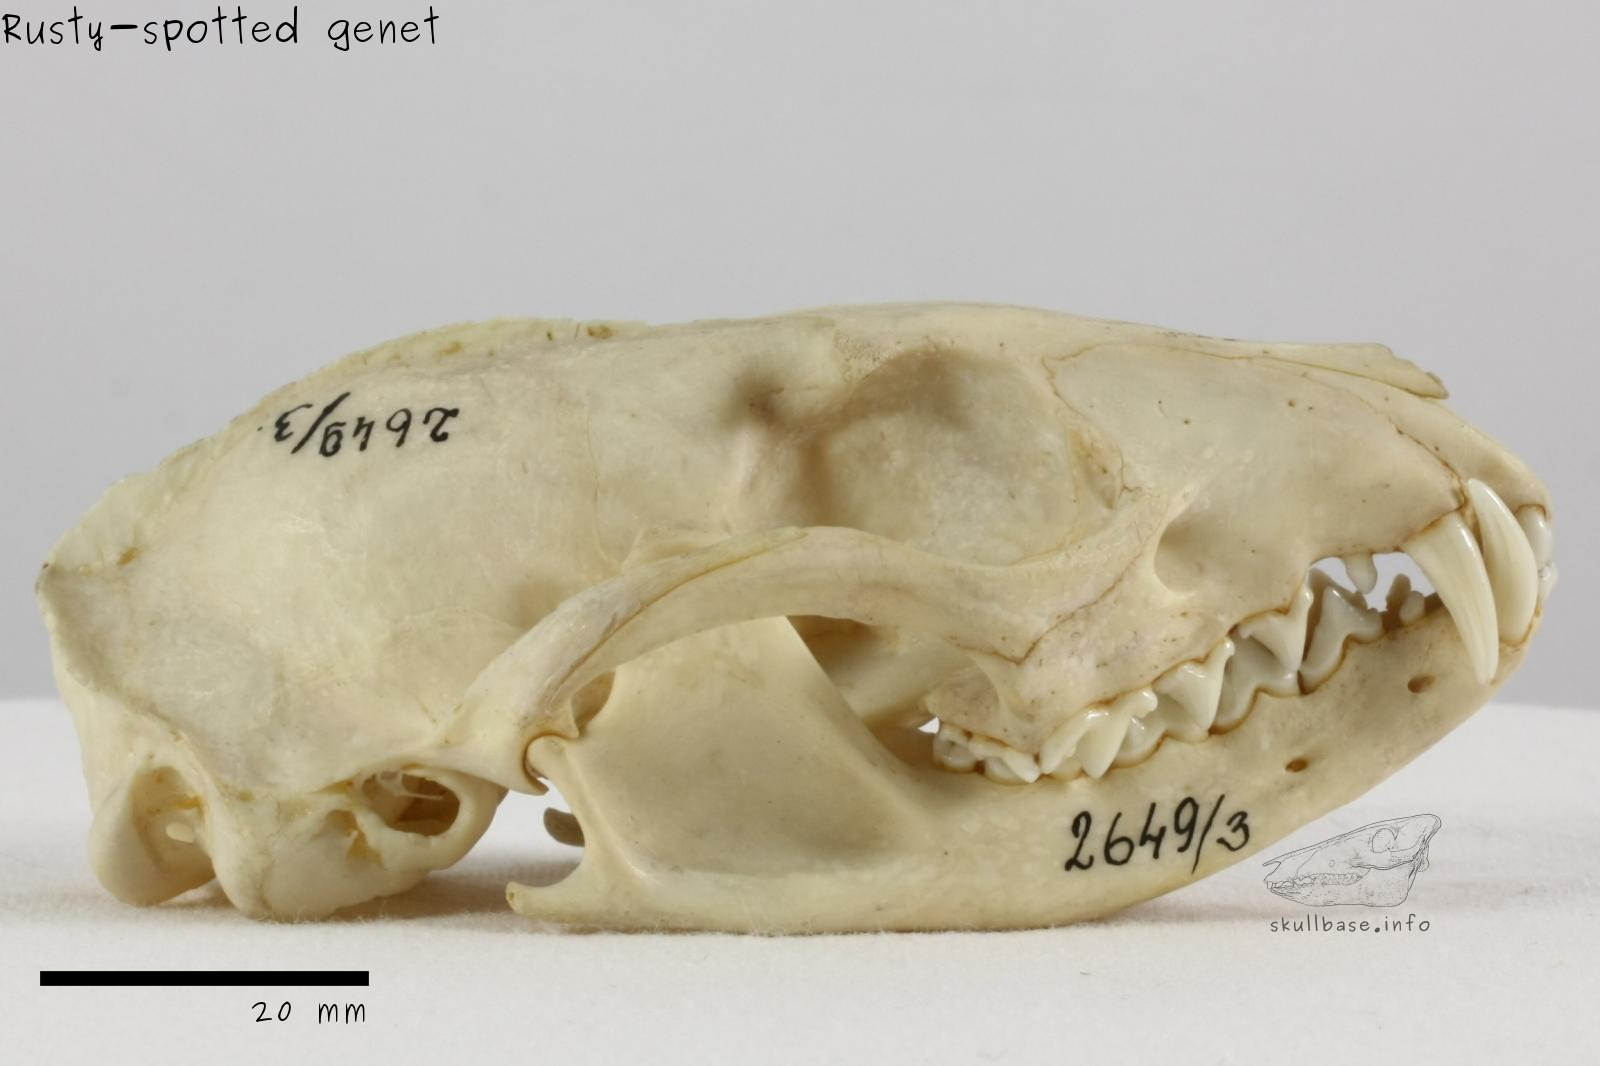 Rusty-spotted genet (Genetta maculata) skull lateral view